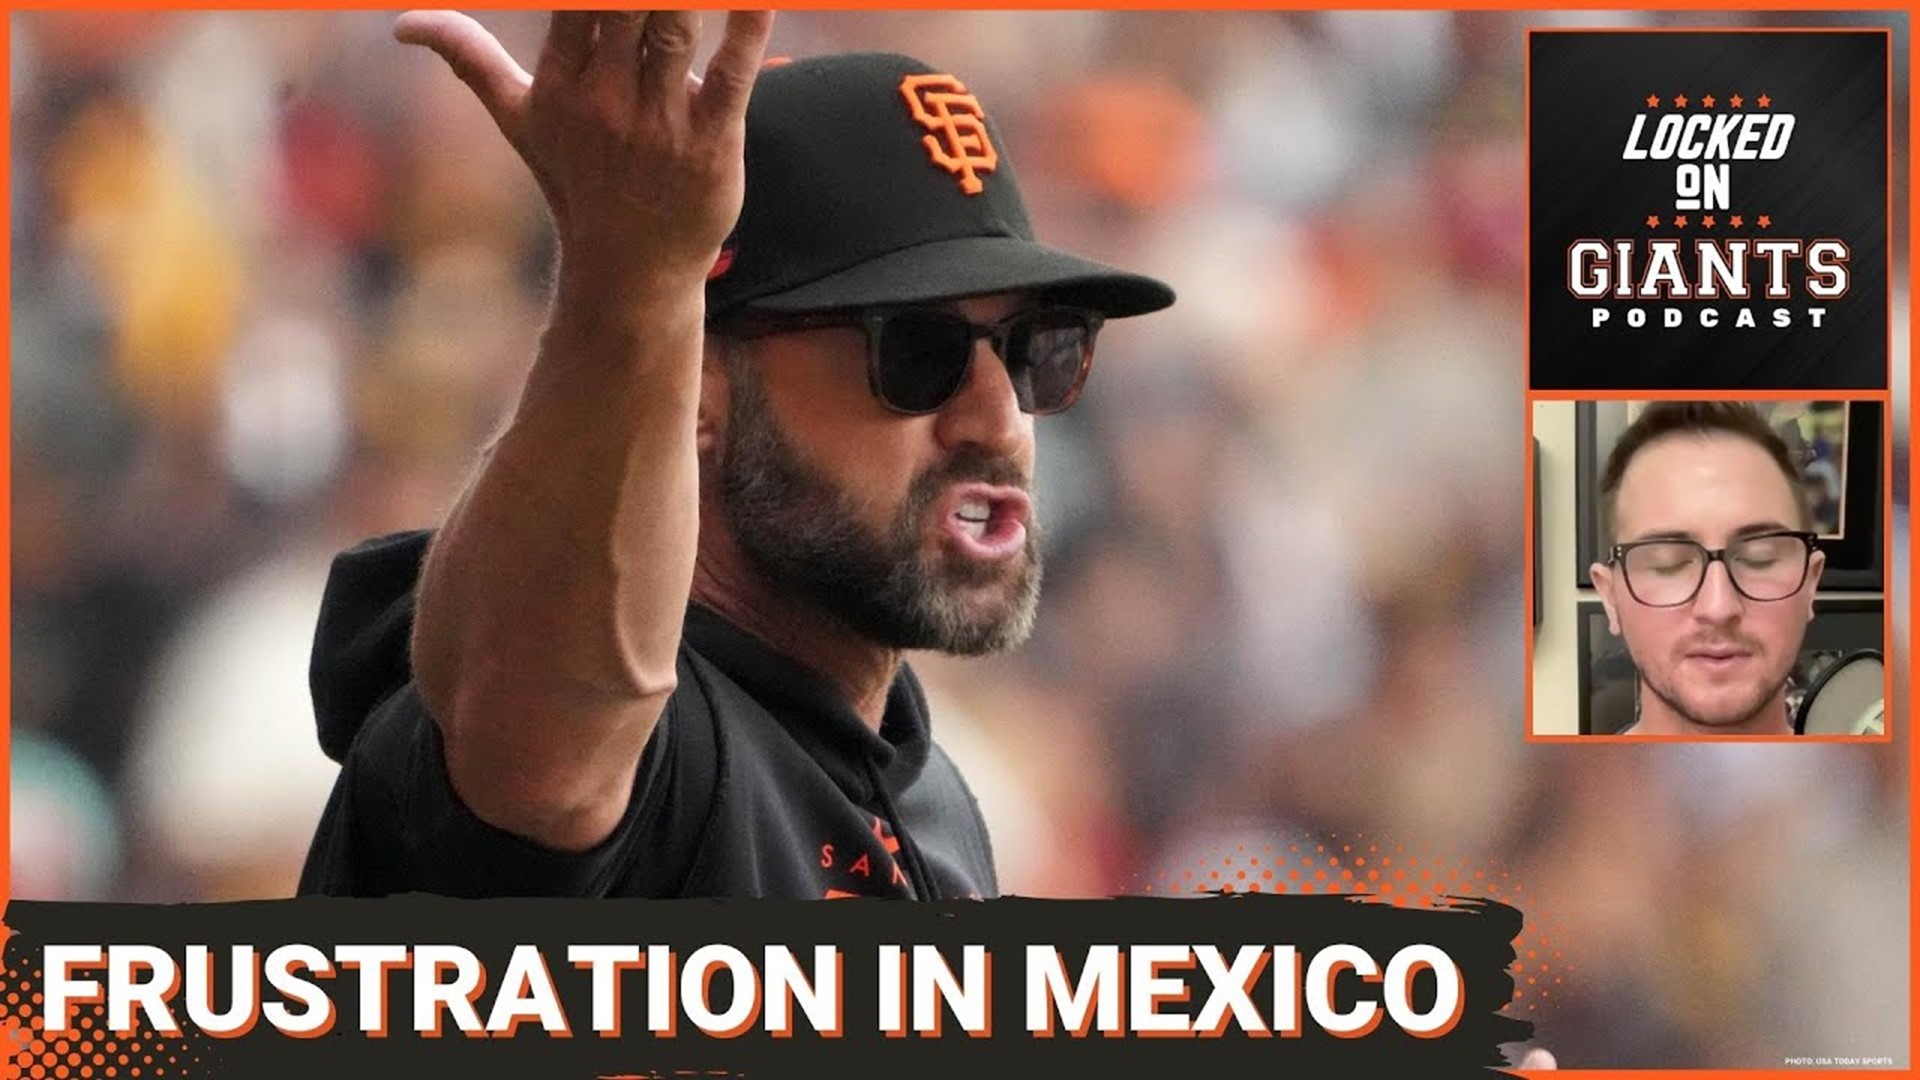 SF Giants swept in Mexico City as pitching woes continue—albeit